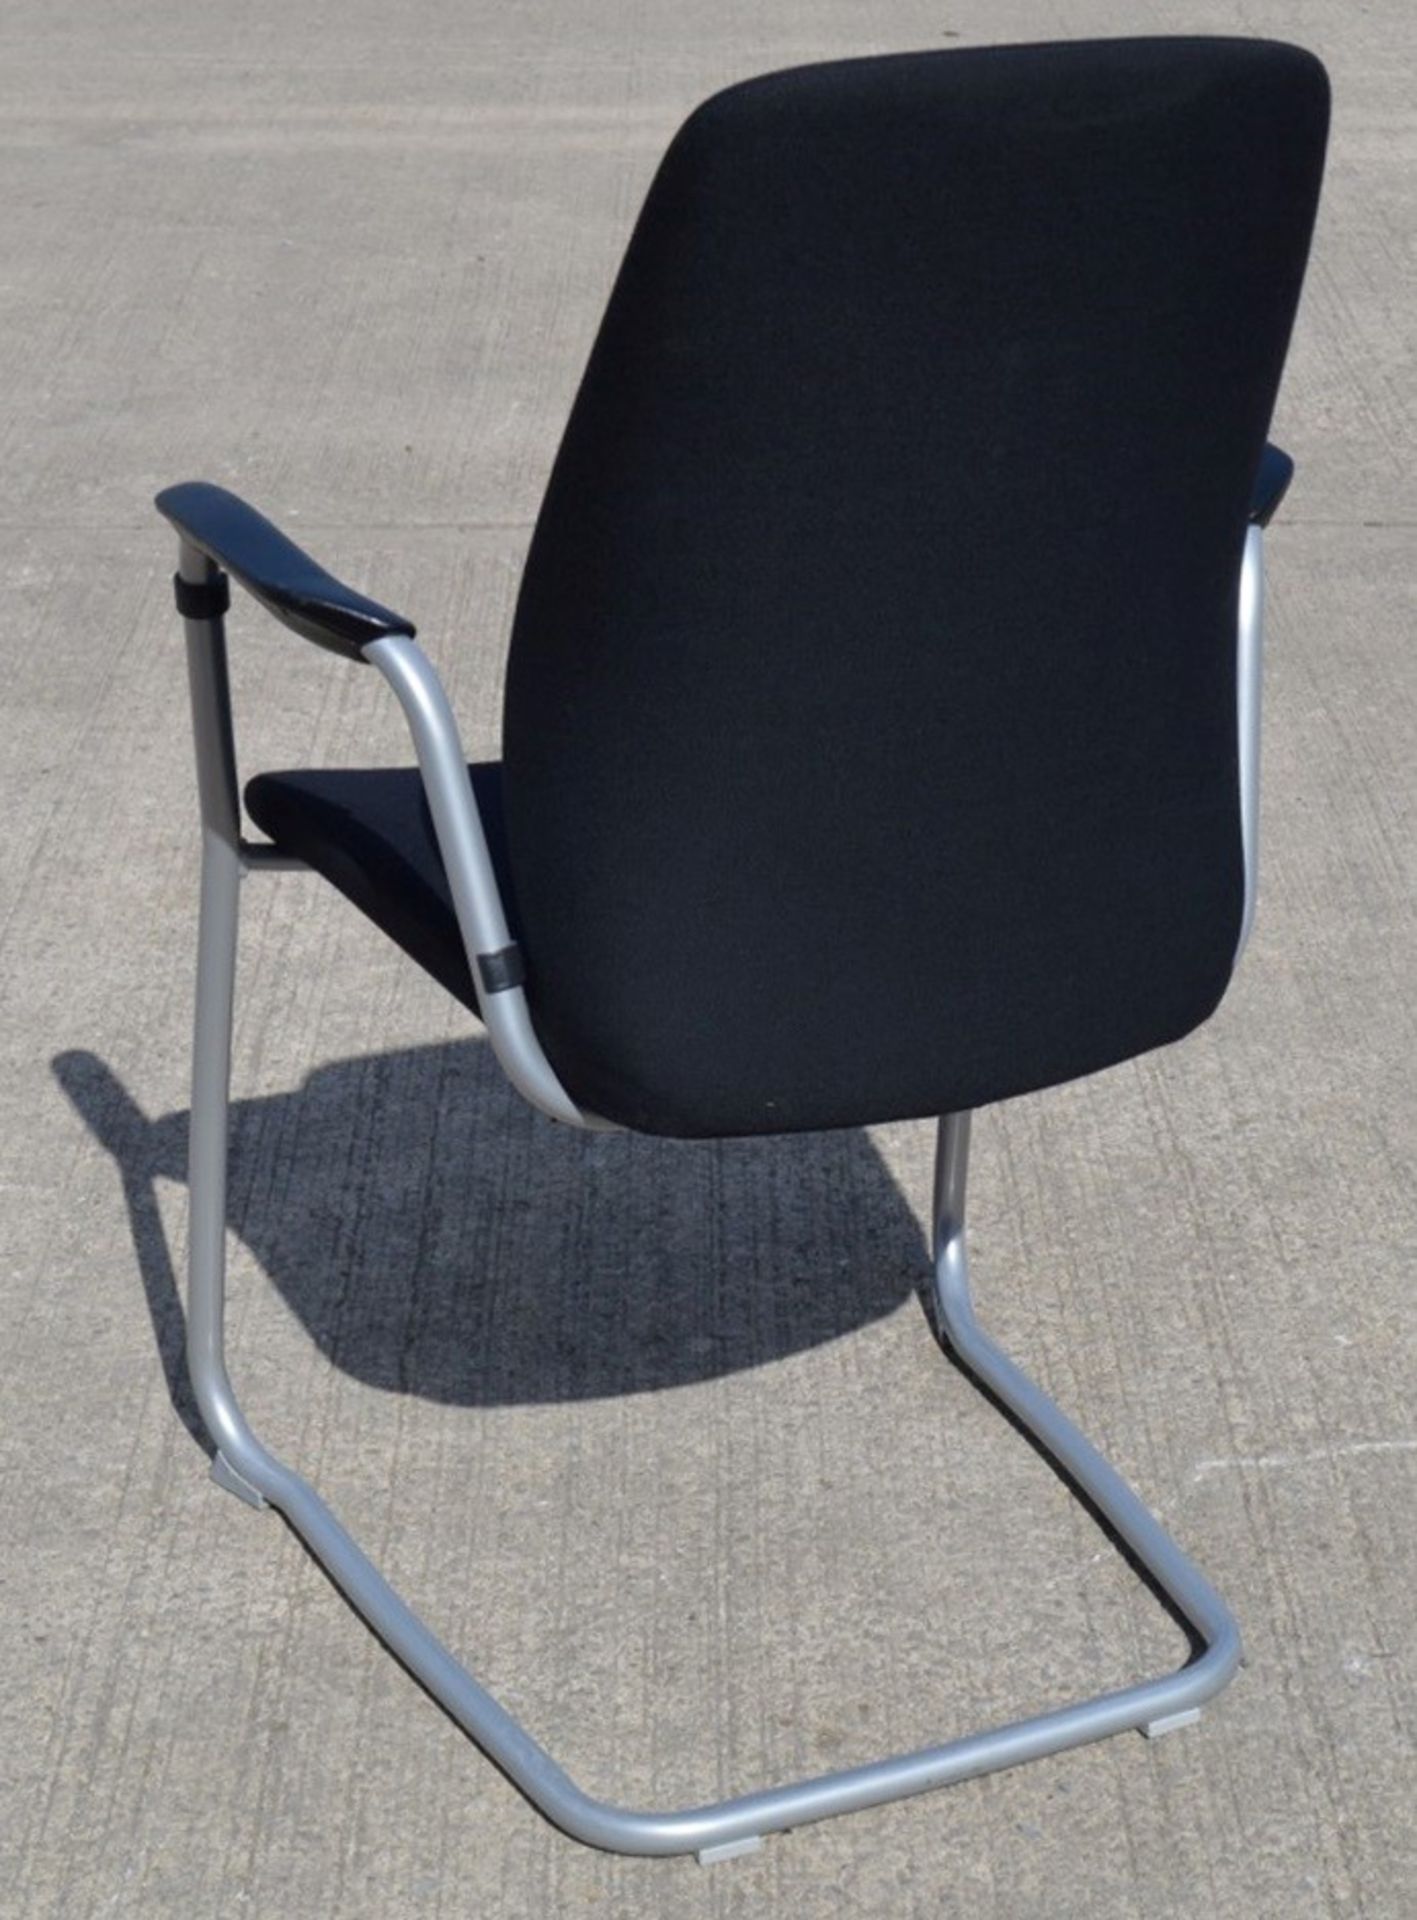 4 x Kinnarps 5000CV Meeting Chairs In Black - Dimensions: W59 x H92 x D53, Seat 45cm - Made In - Image 2 of 7